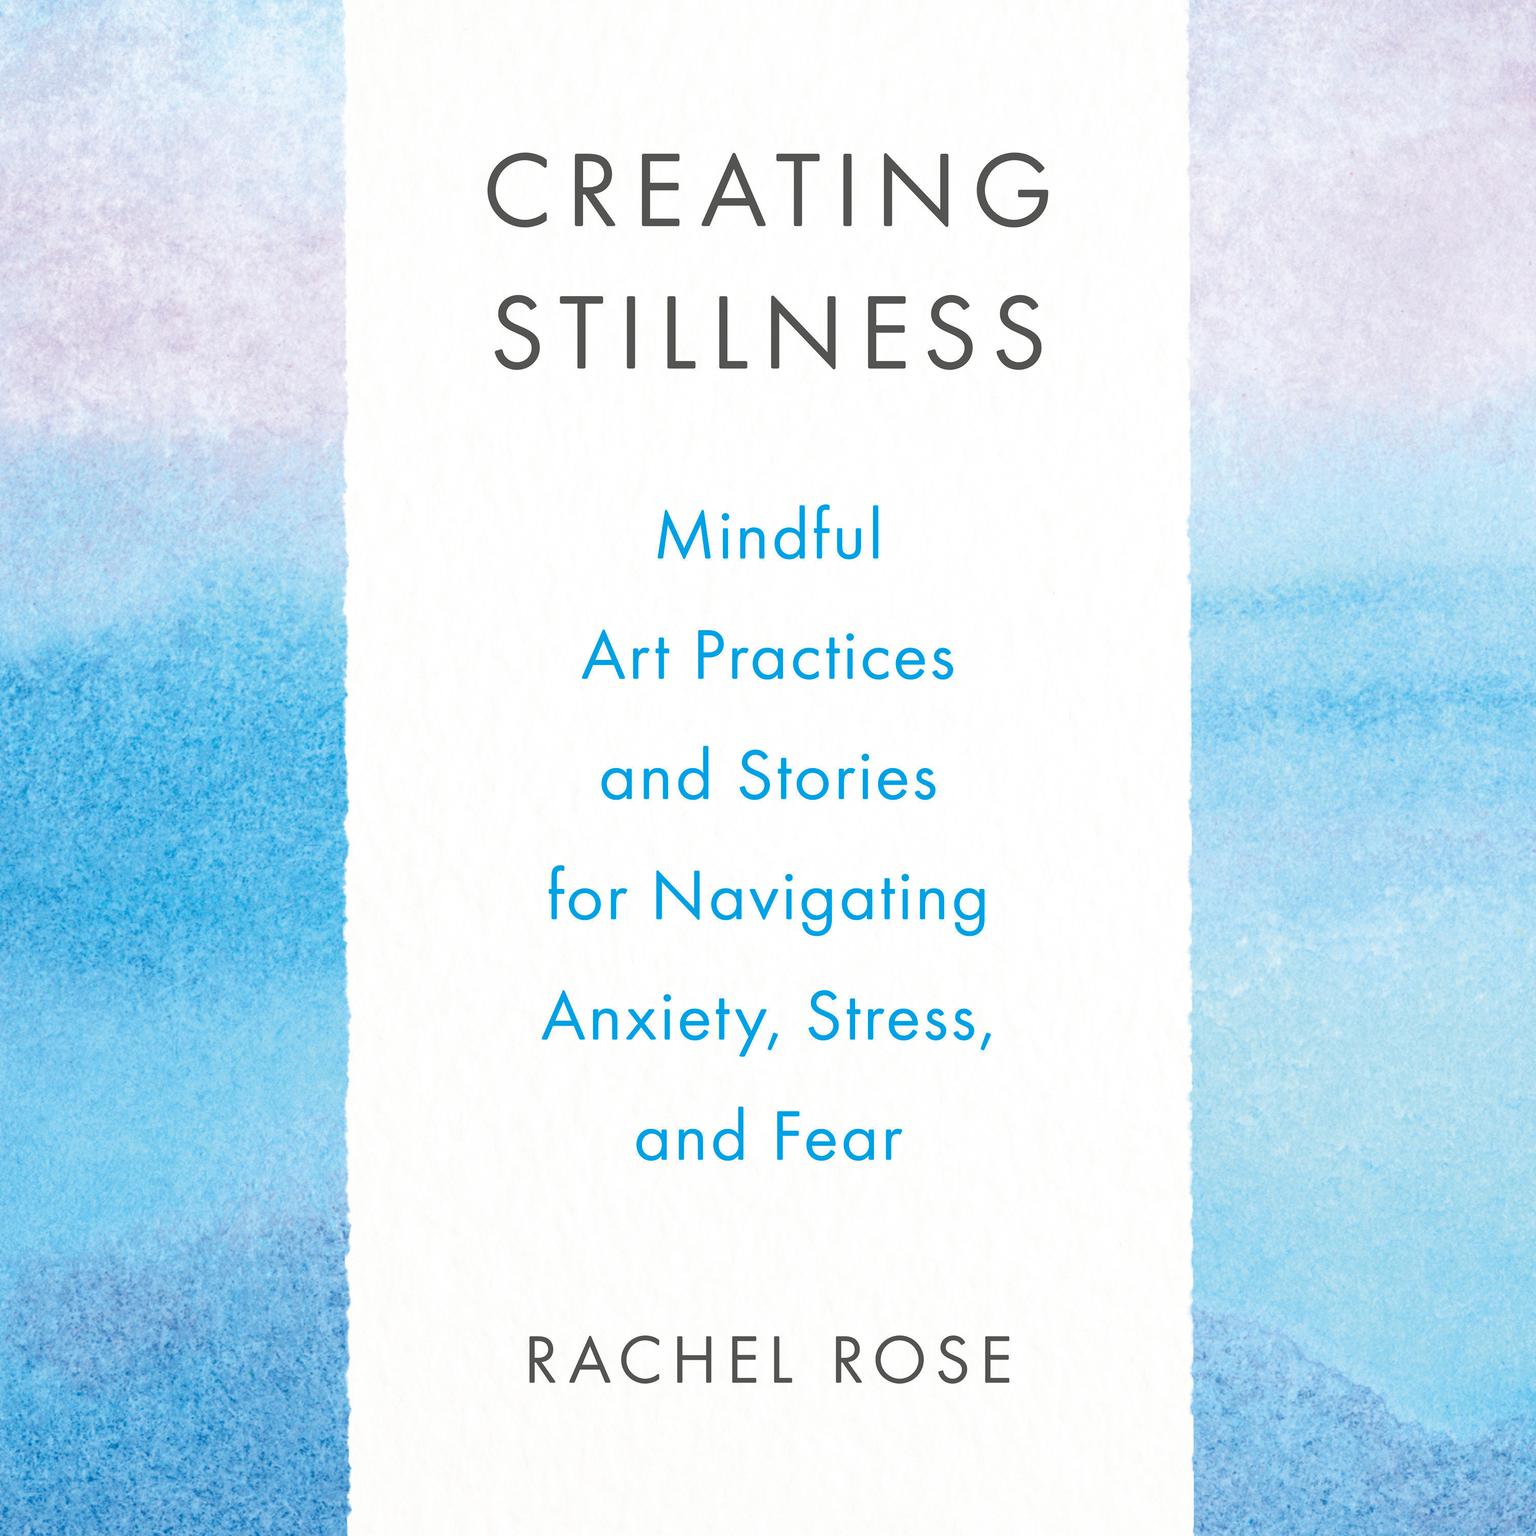 Creating Stillness: Mindful Art Practices and Stories for Navigating Anxiety, Stress, and Fear Audiobook, by Rachel Rose